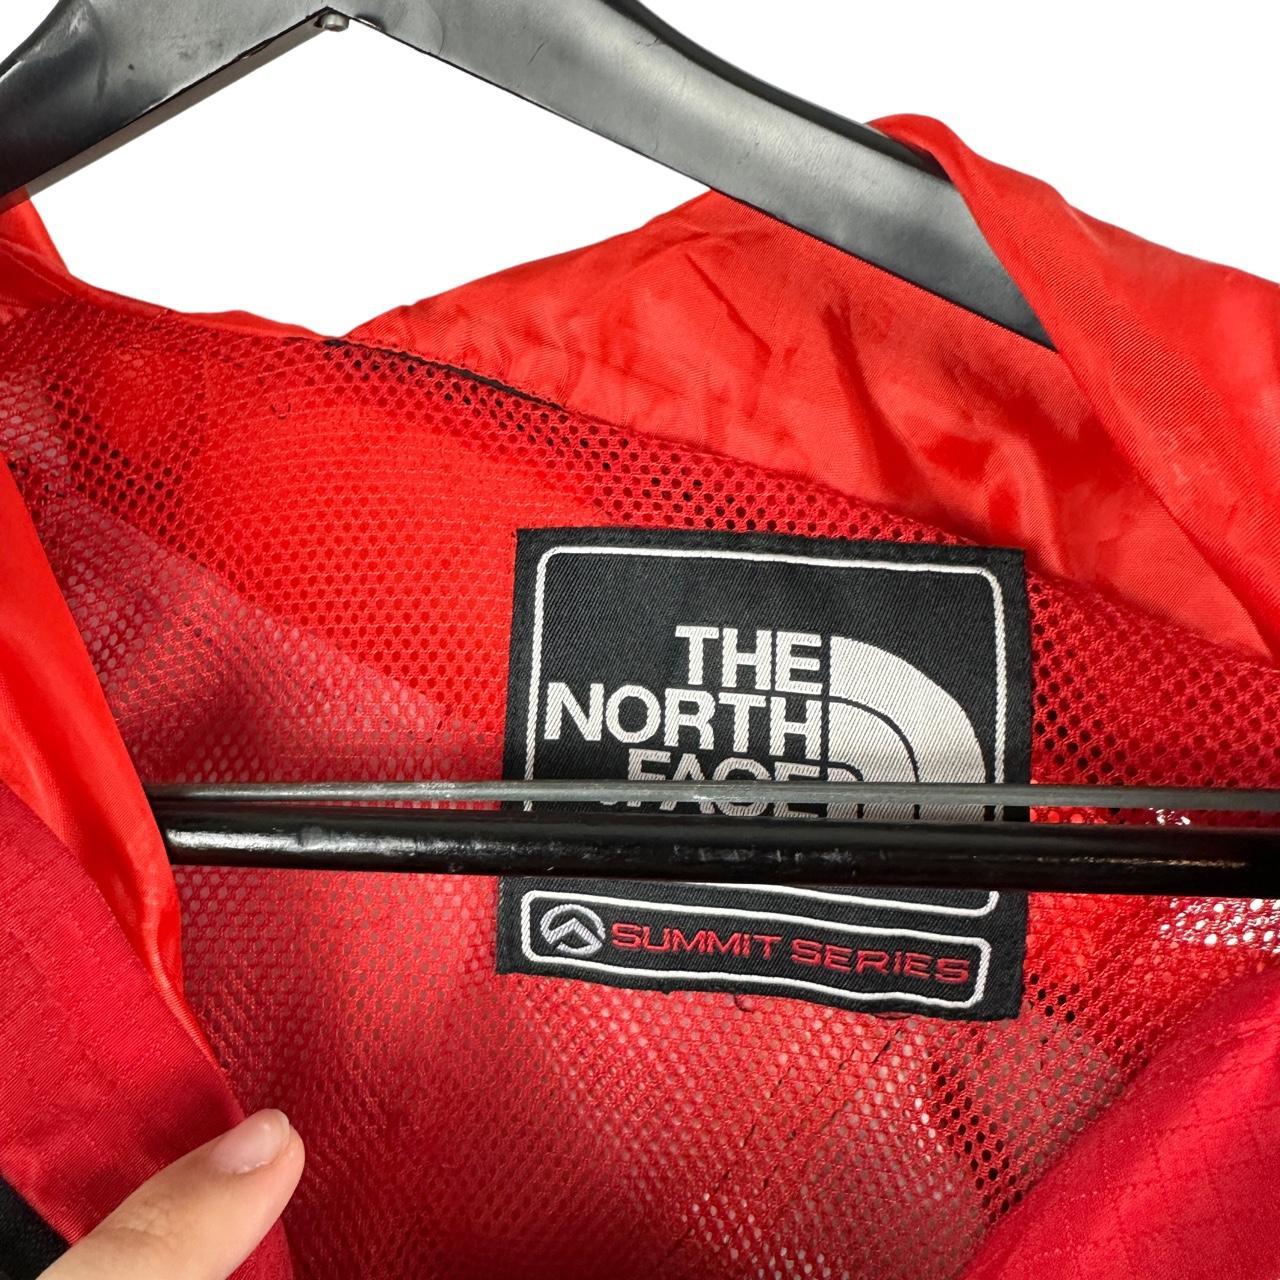 The North Face Men's Jacket (4)